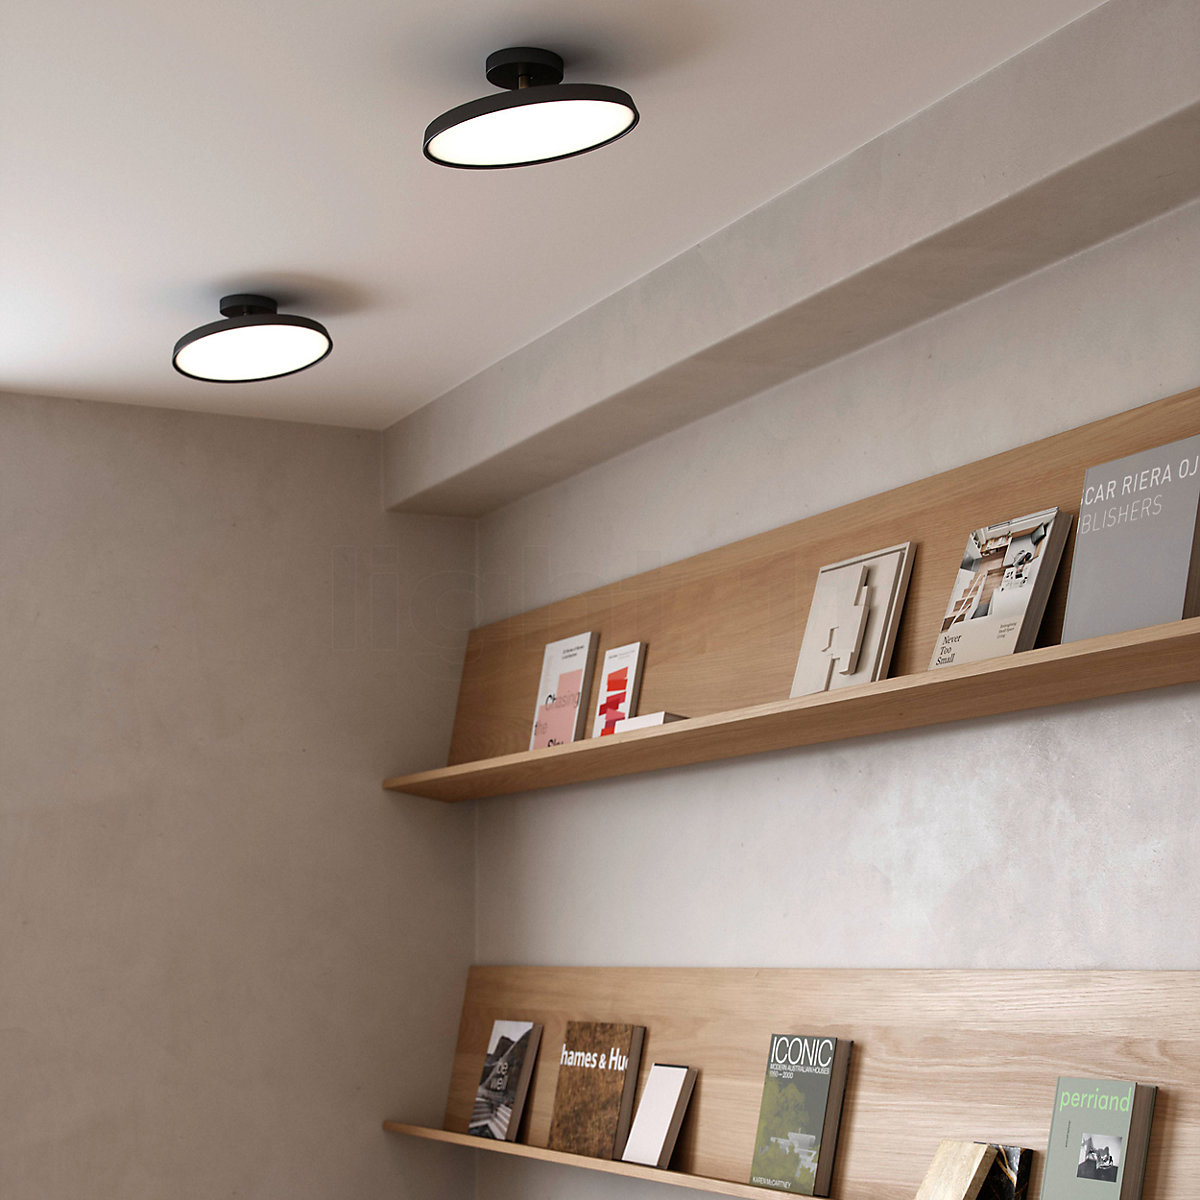 Buy Design People Light for at Ceiling LED Pro Kaito the